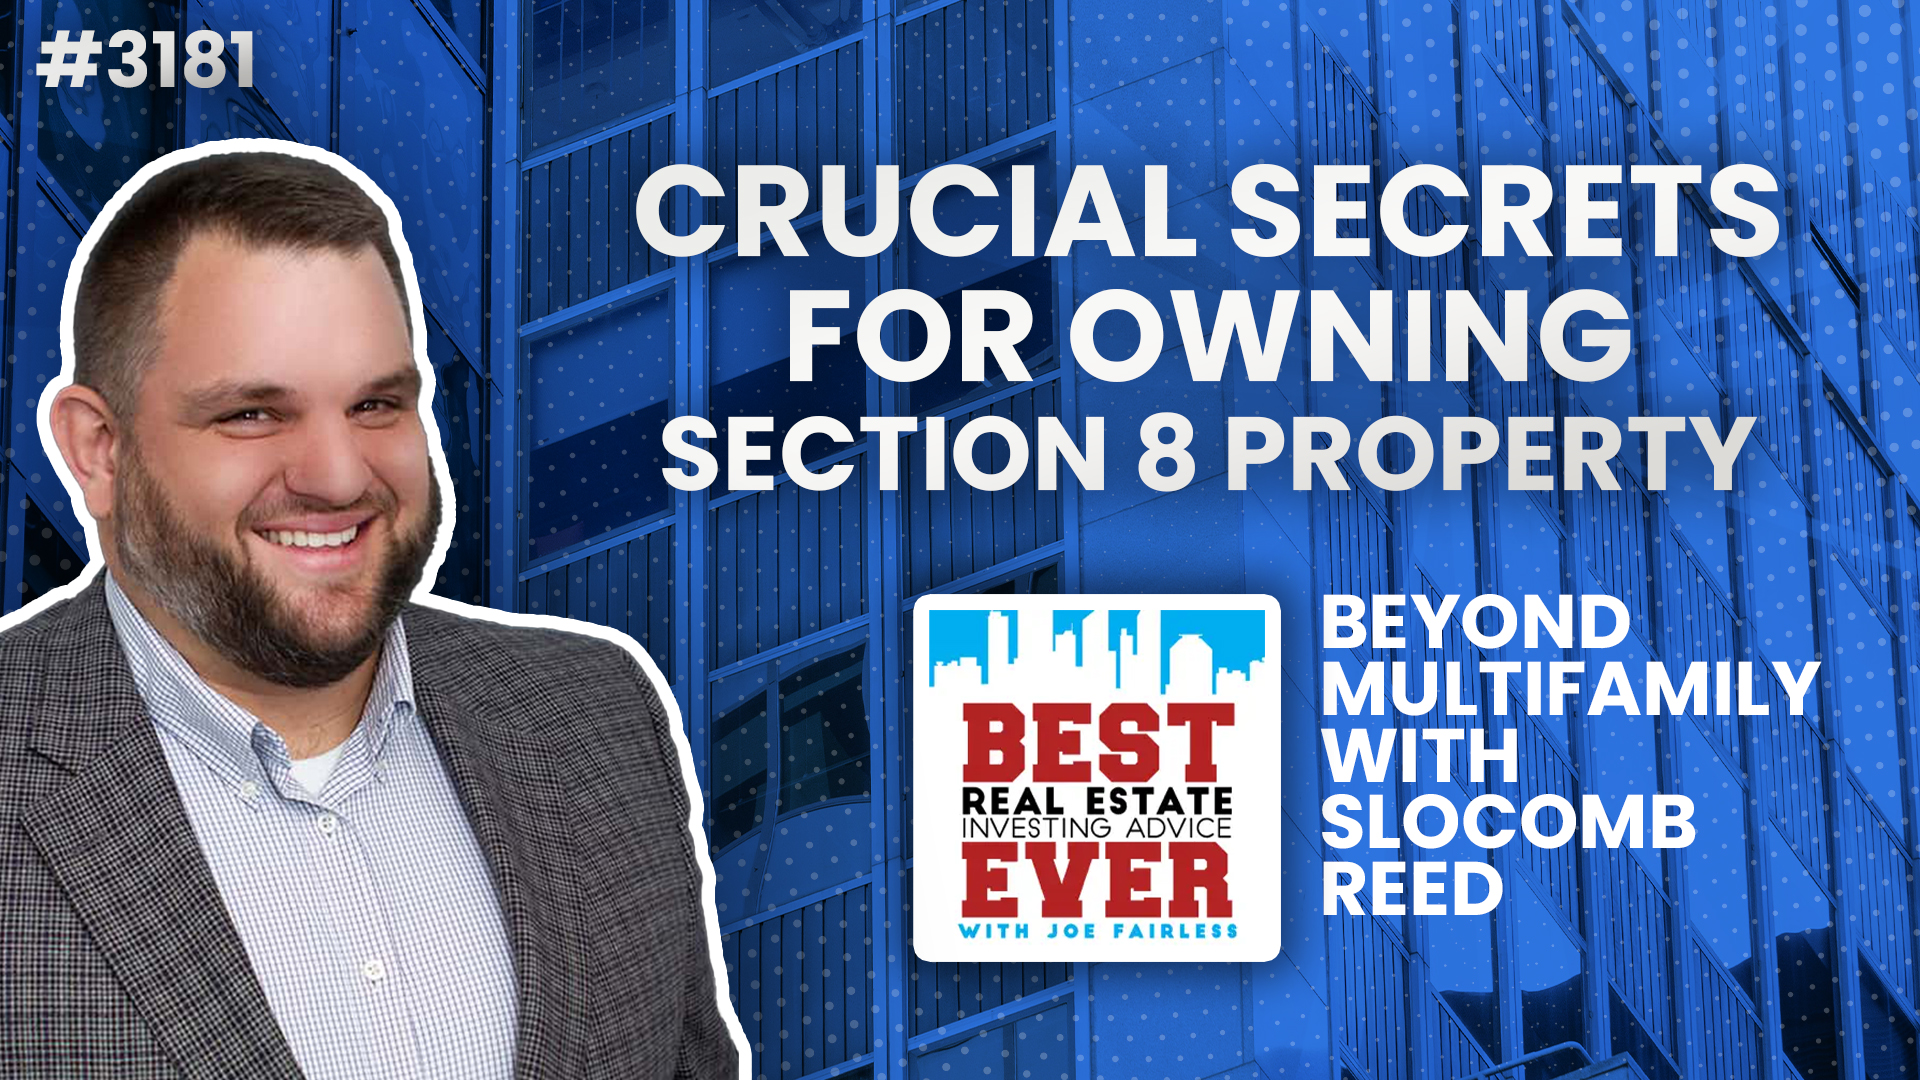 JF3181: Crucial Secrets for Owning Section 8 Property | Bonus Operations ft. Slocomb Reed